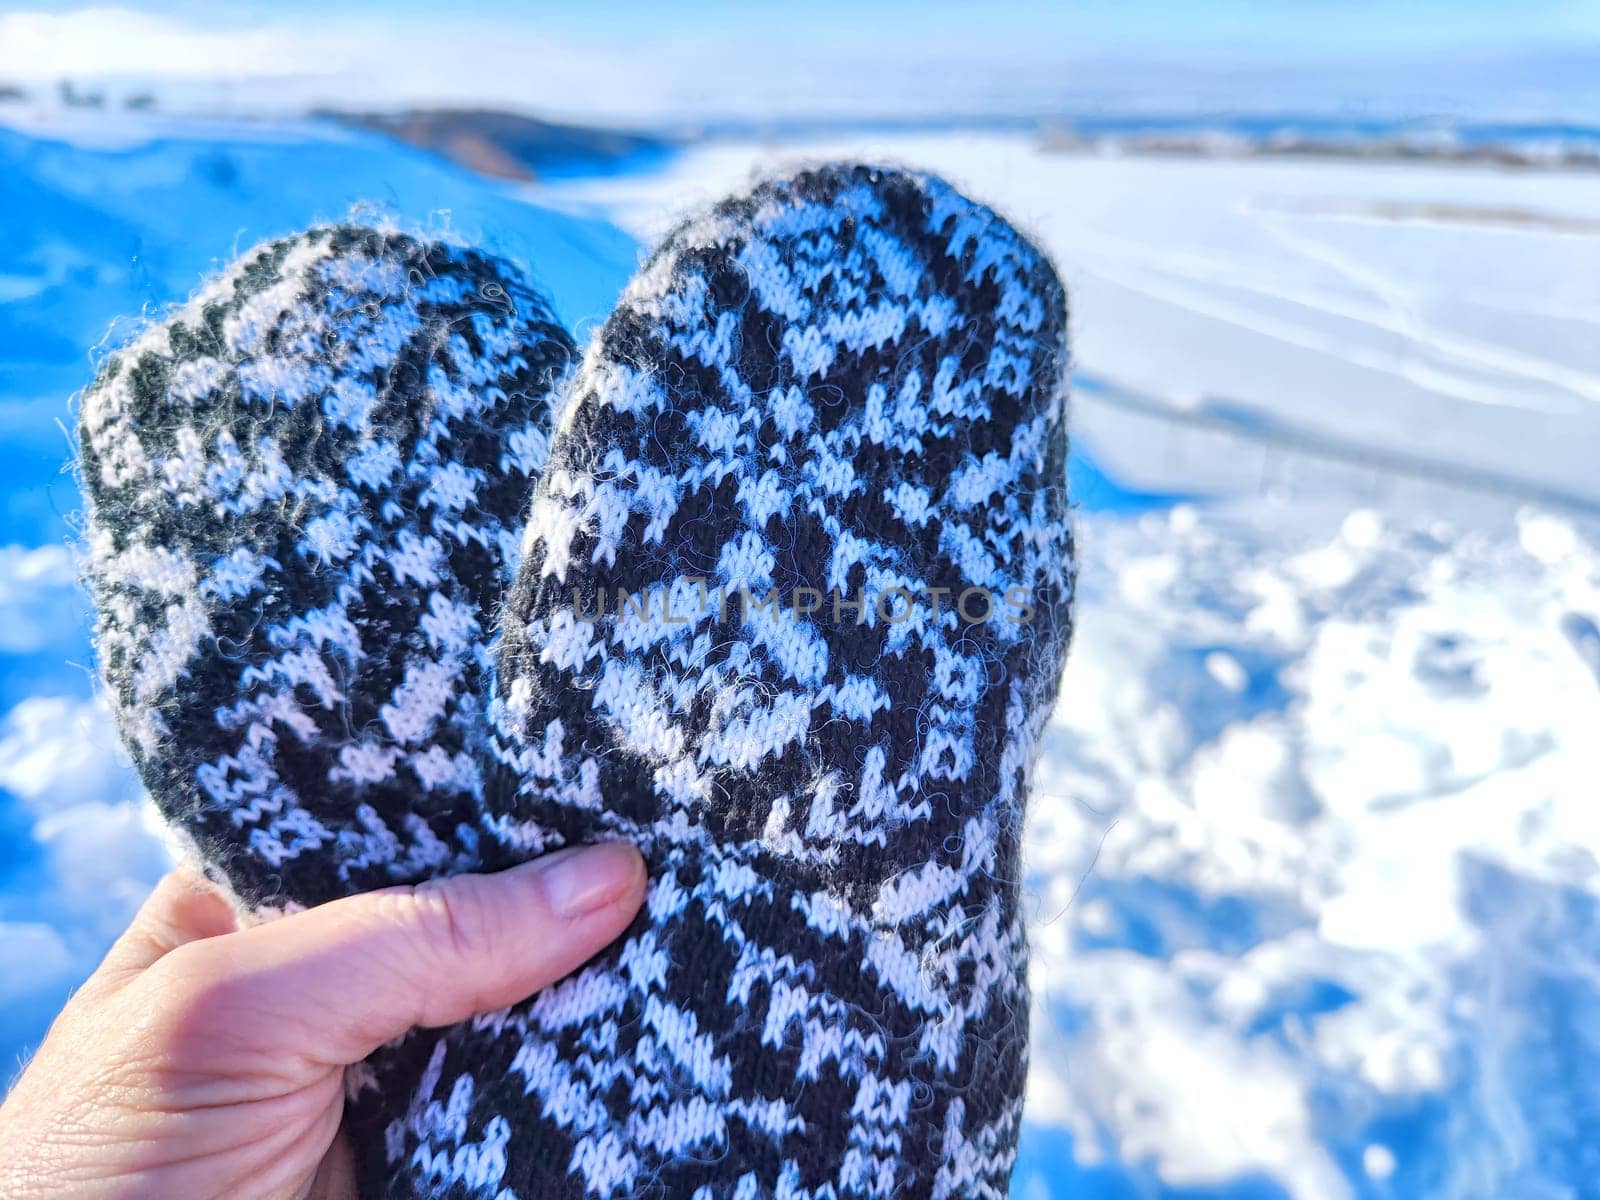 A hand with patterned woolen mittens gives thumbs up against a clear, snowy landscape